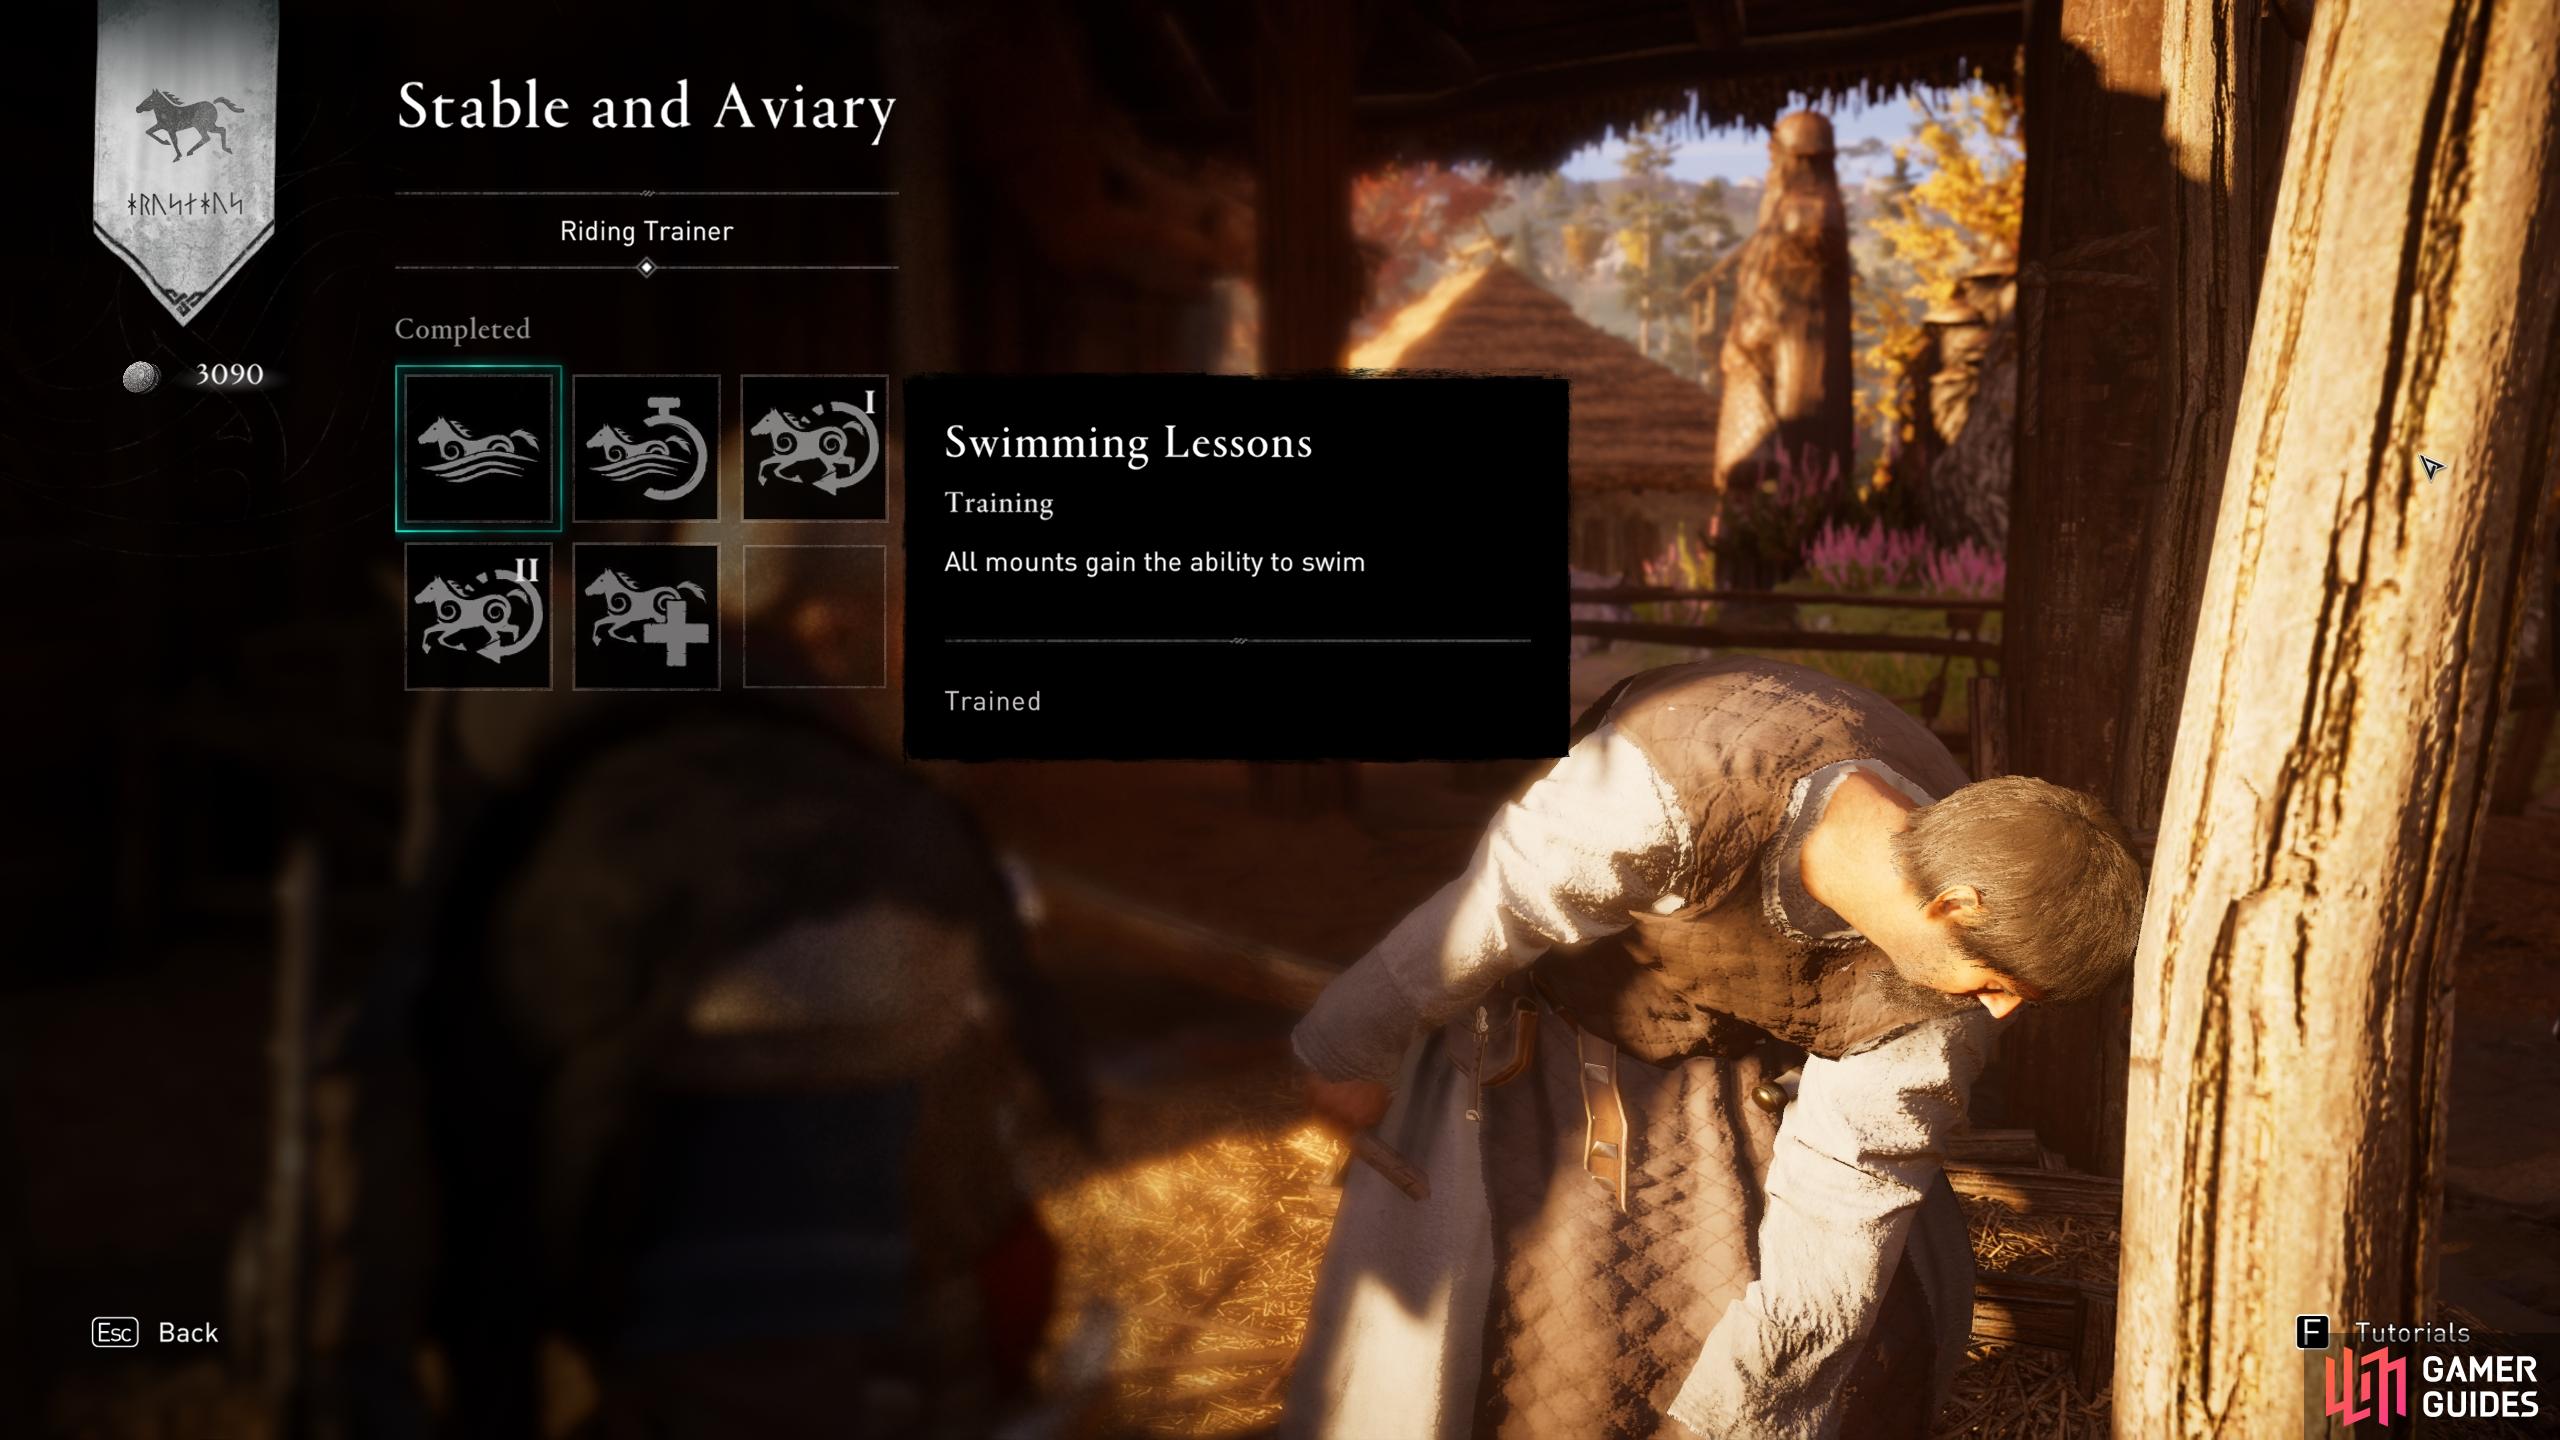 You can improve the attributes of your mount from the stable and aviary.